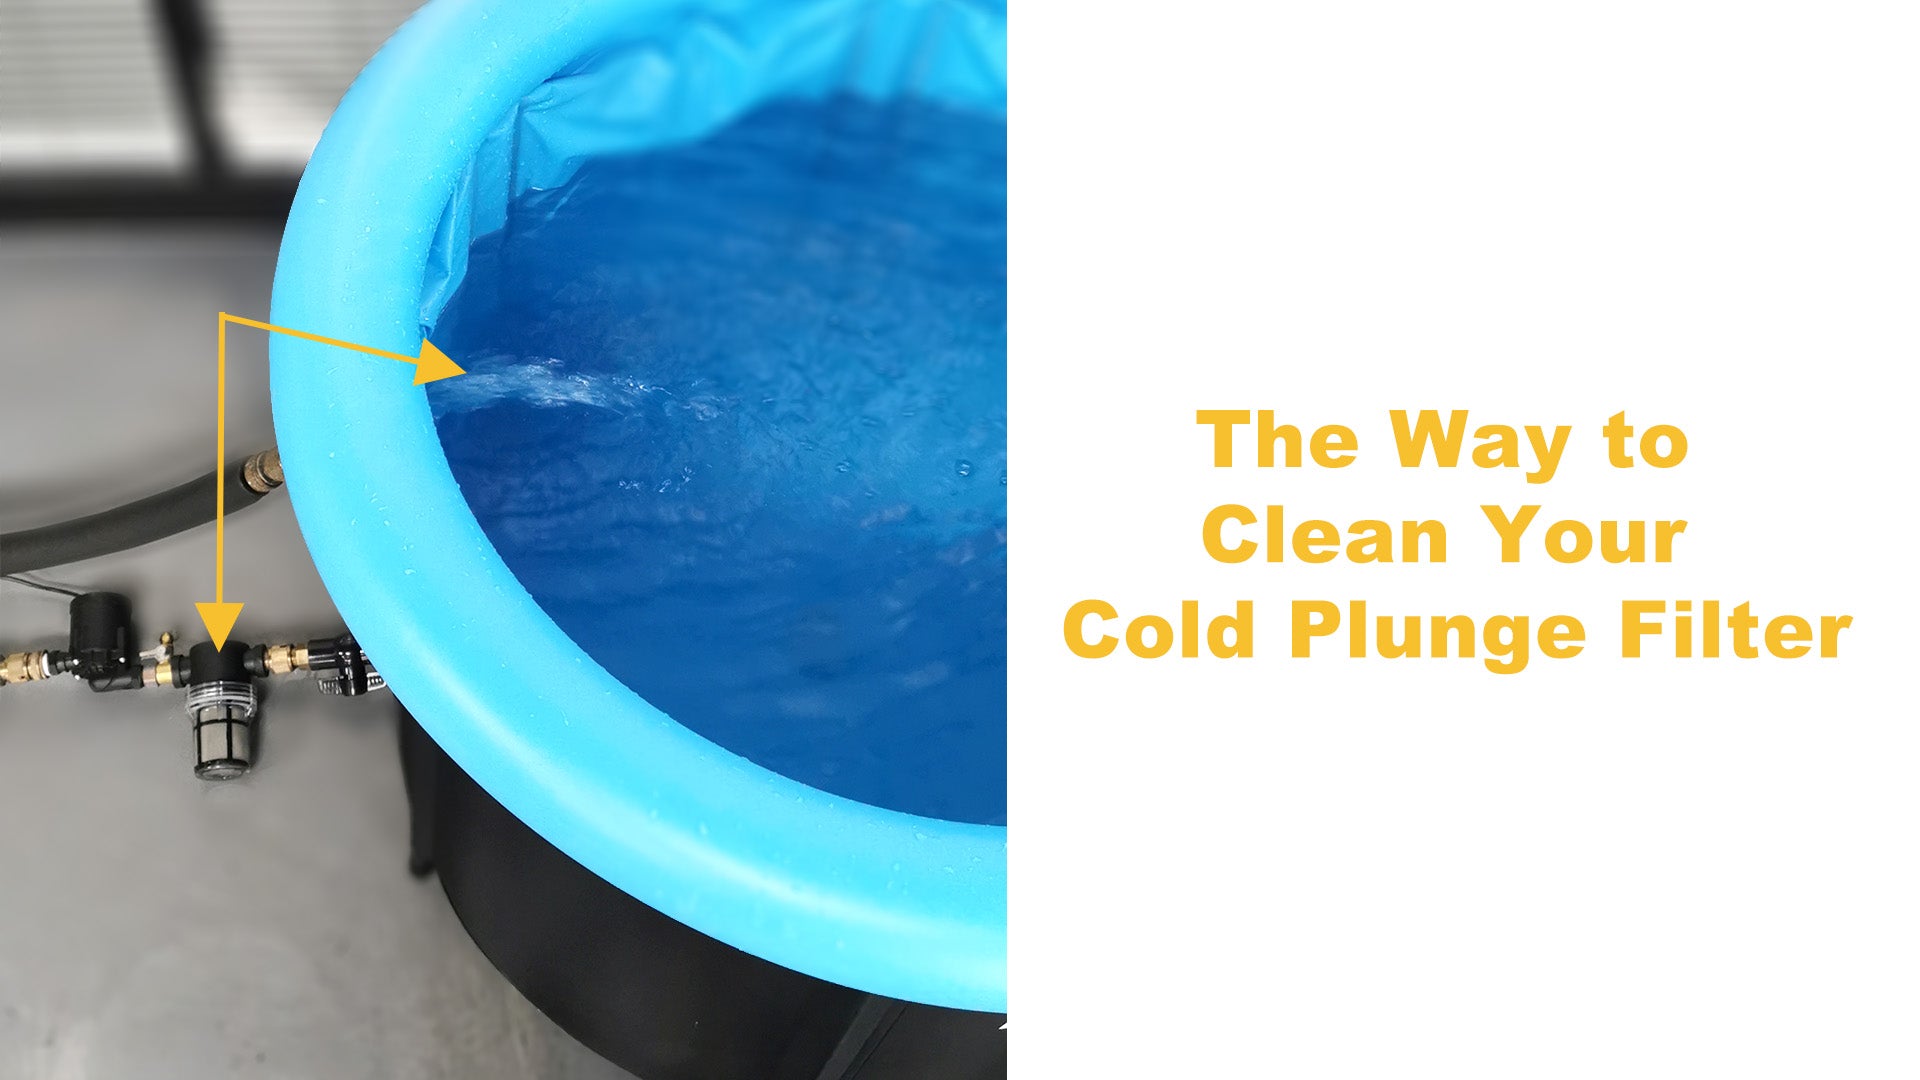 Load video: clean cold plunge filter